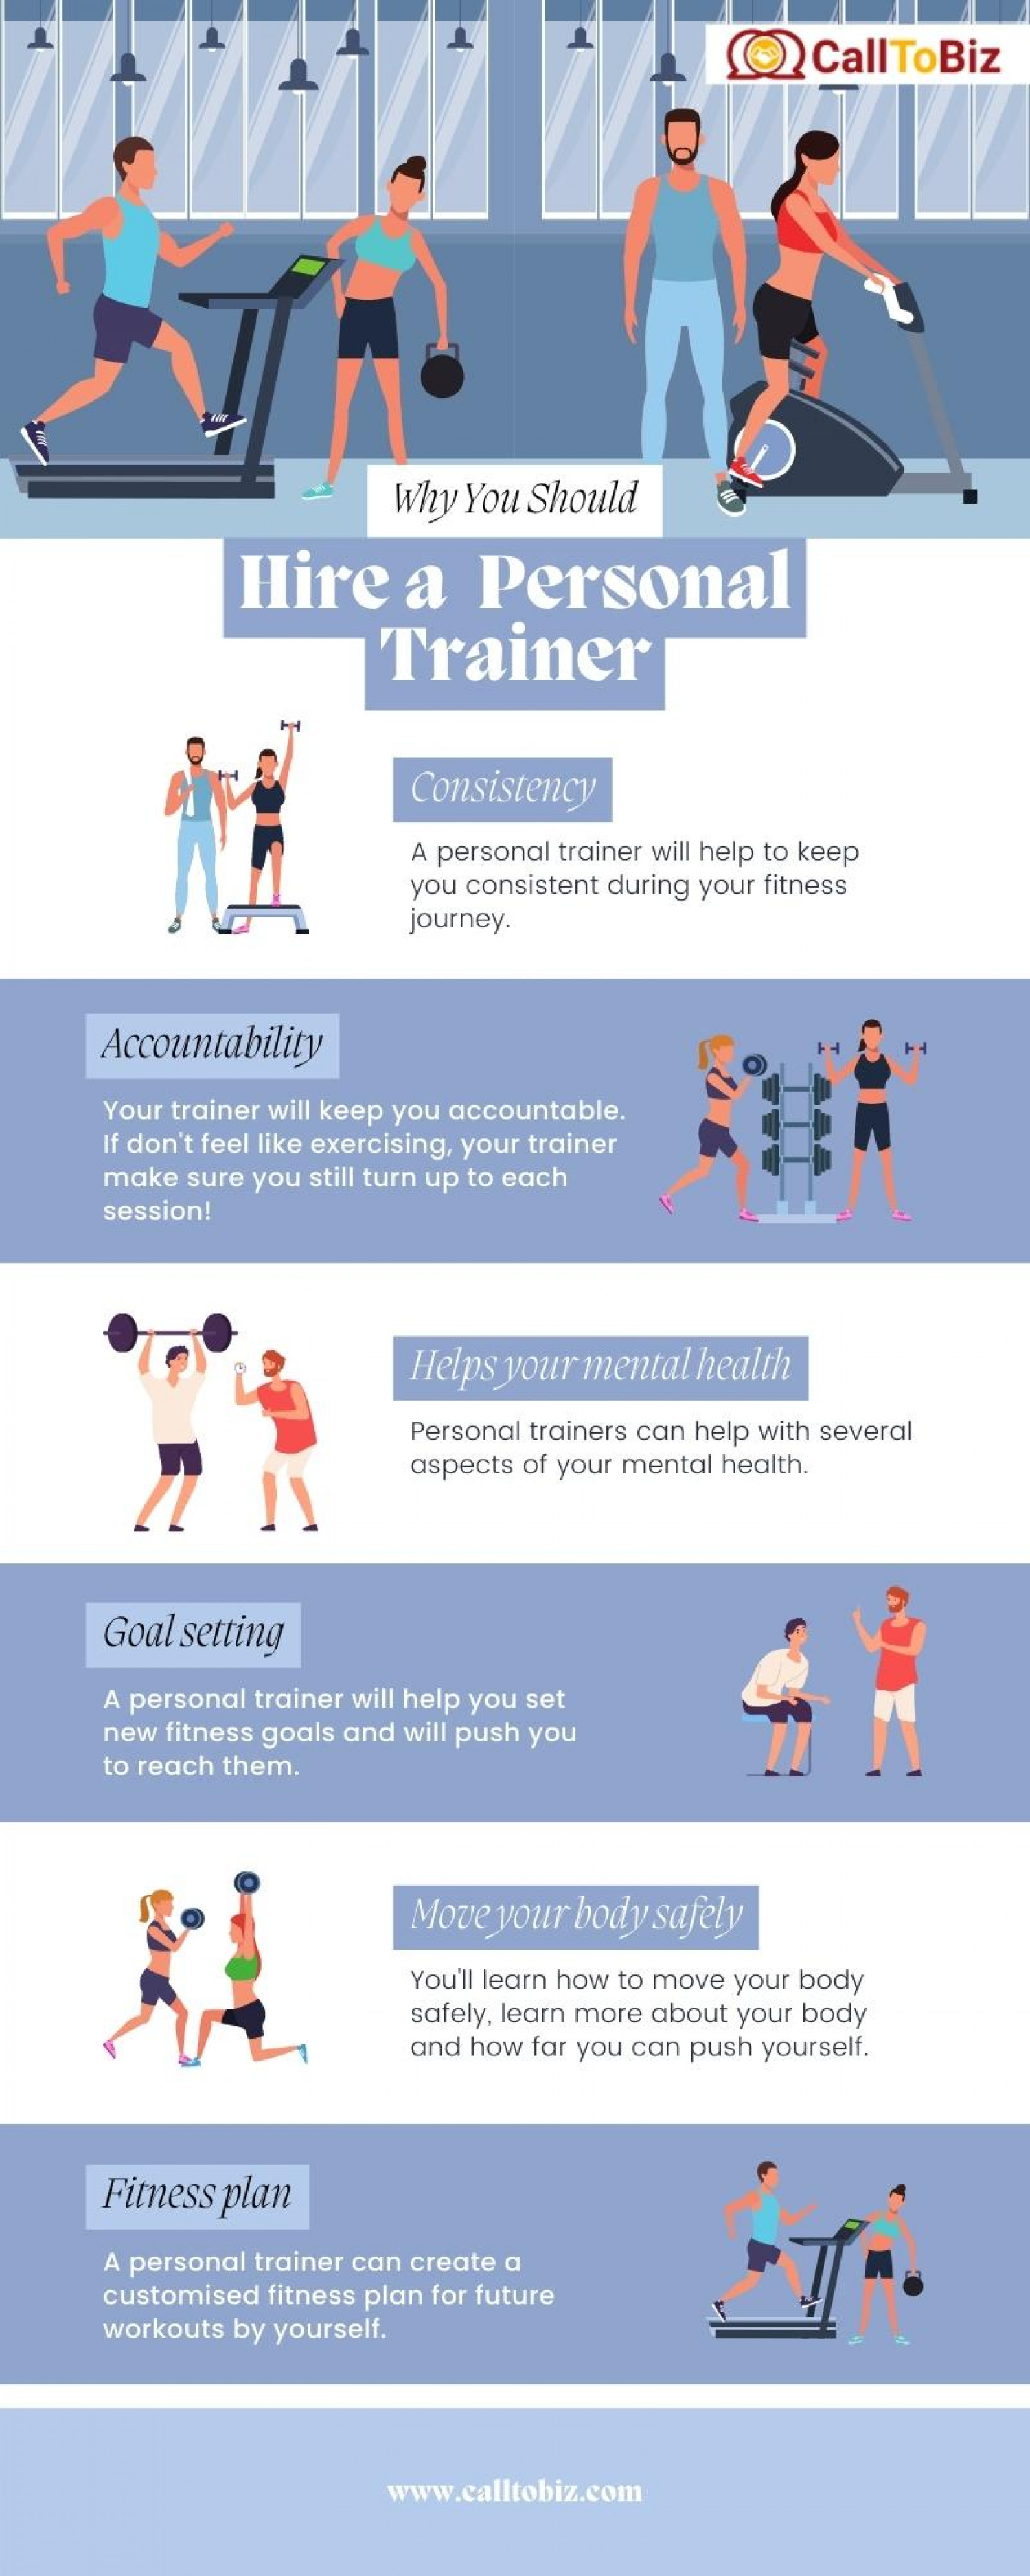 Achieve Your Fitness Goals with Top Freelance Trainers - Hire Now with CallToBiz! Infographic